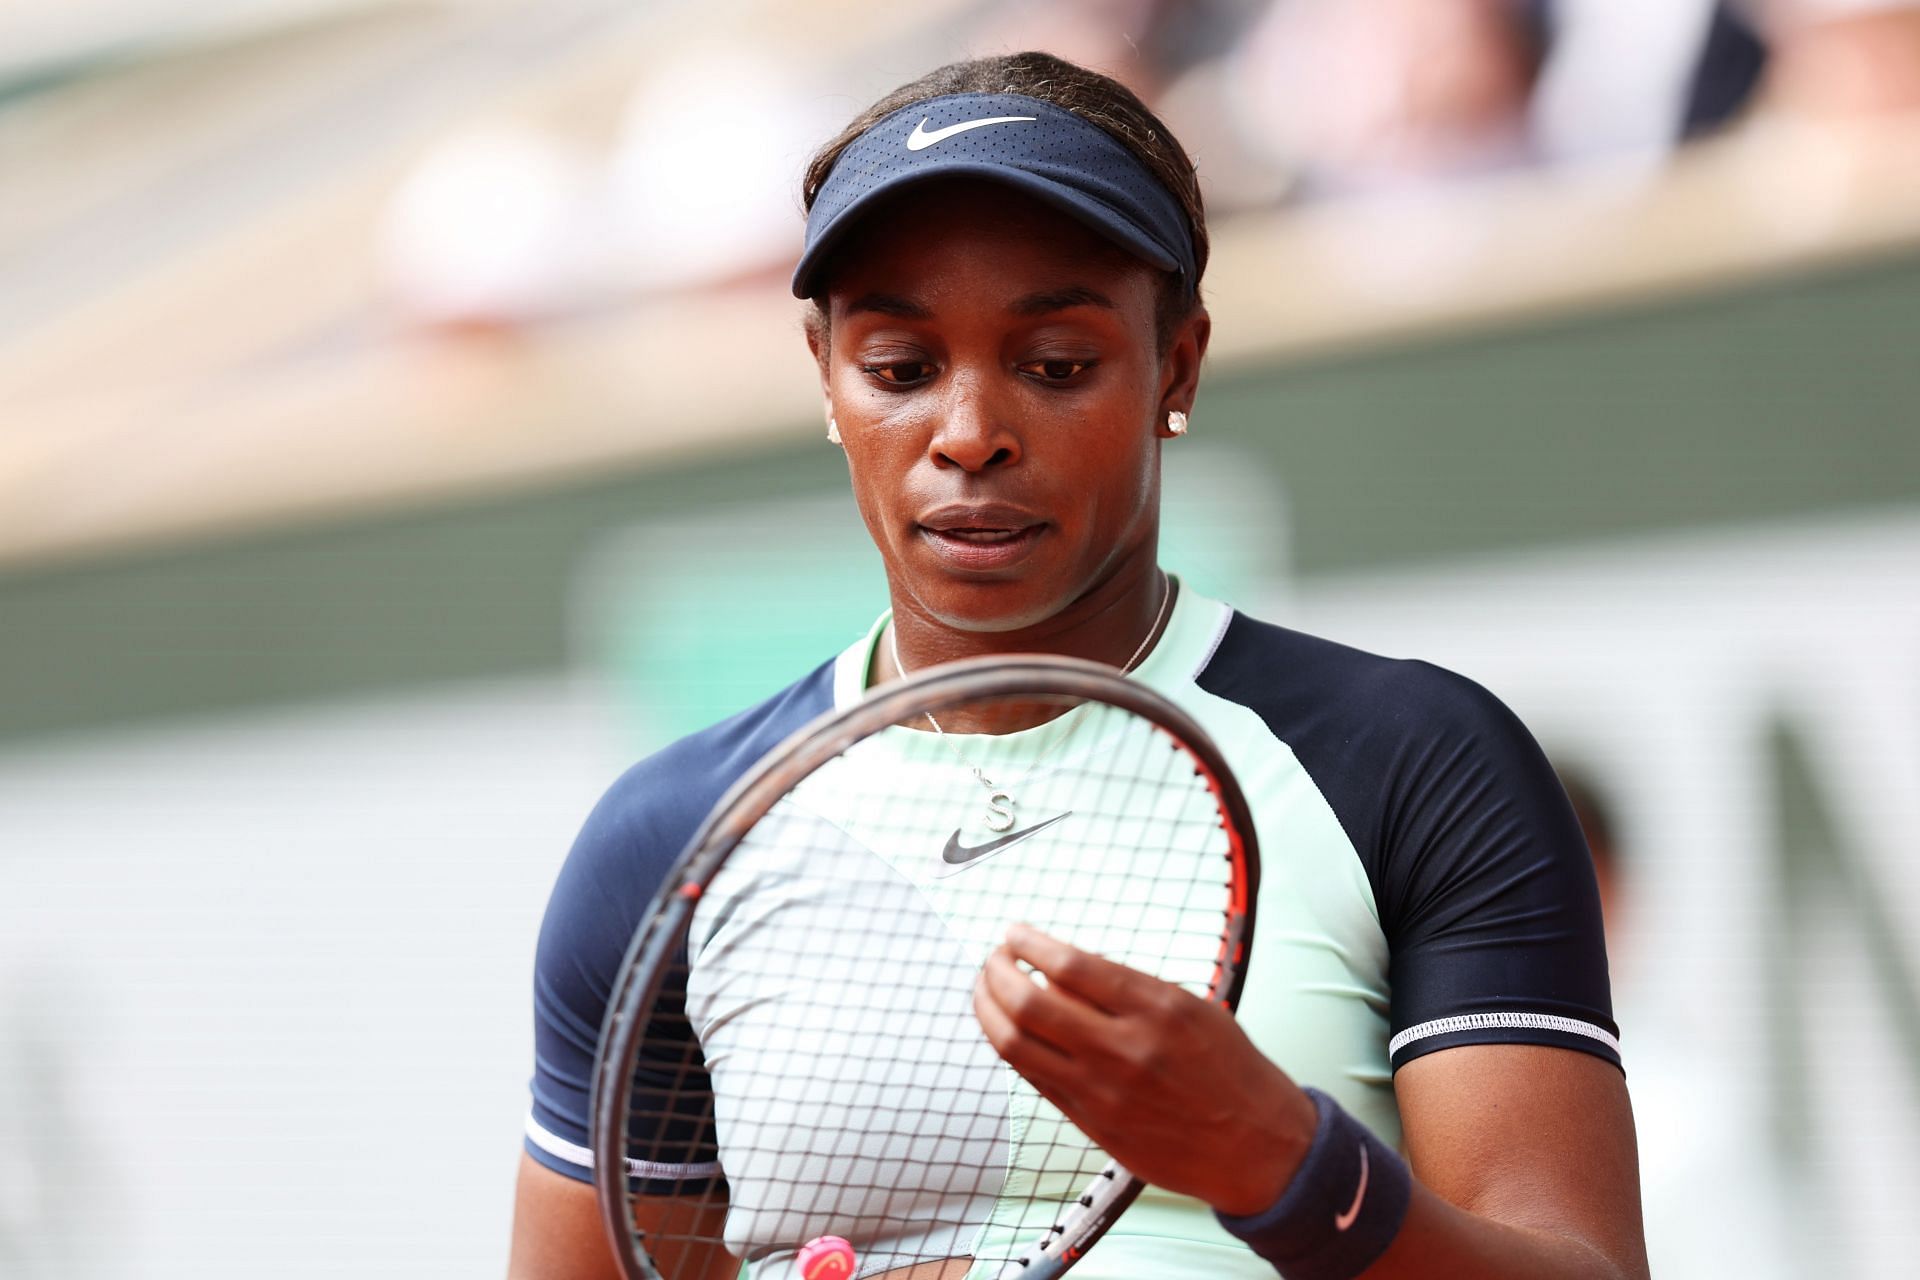 Sloane Stephens will look to reach the second round of Wimbledon